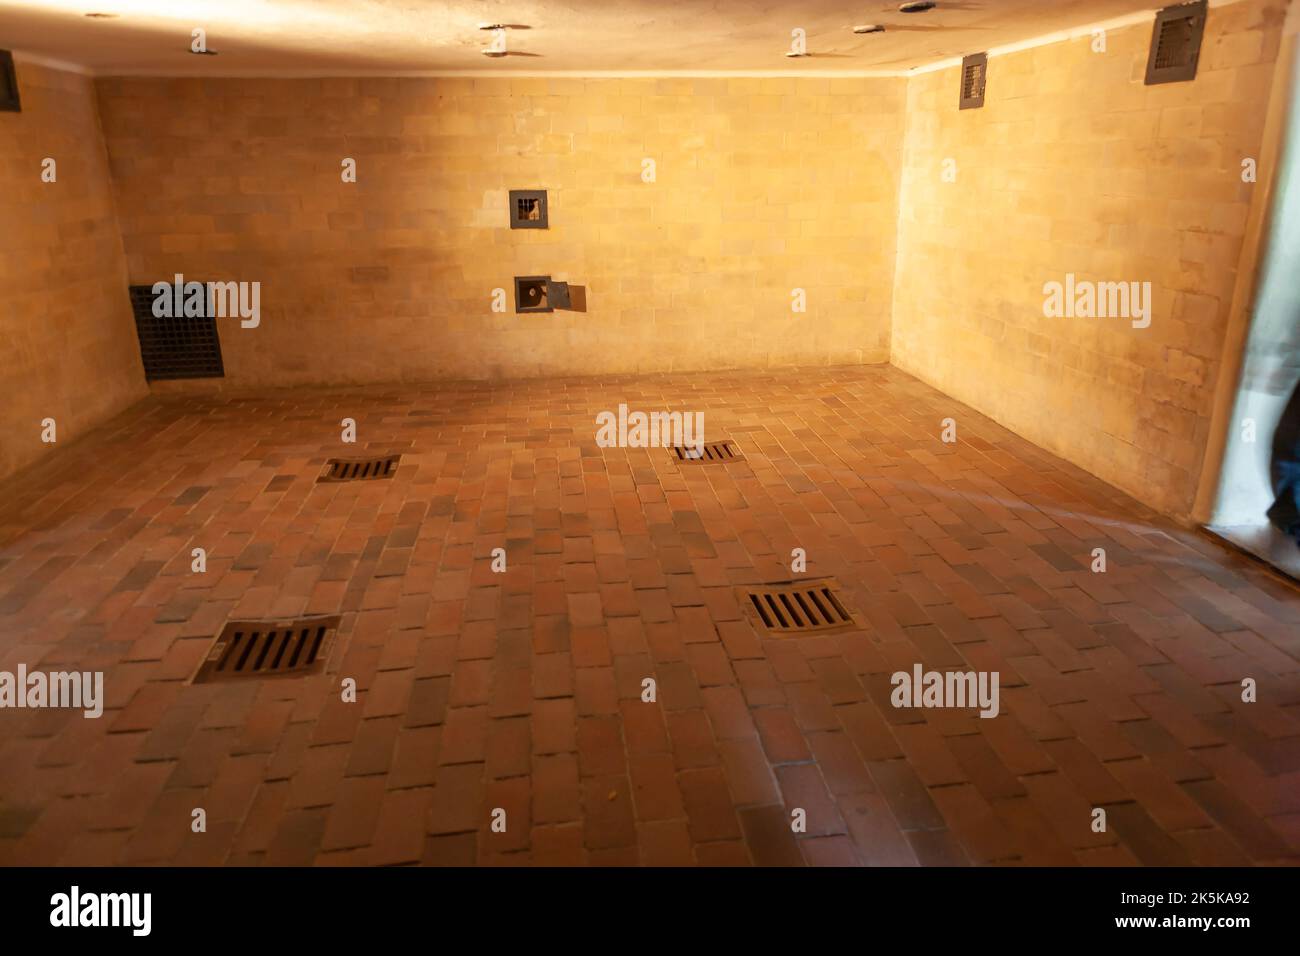 https://c8.alamy.com/comp/2K5KA92/dachau-germany-july-4-2011-dachau-concentration-camp-memorial-site-nazi-concentration-camp-from-1933-to-1945-gas-chamber-disguised-as-shower-r-2K5KA92.jpg